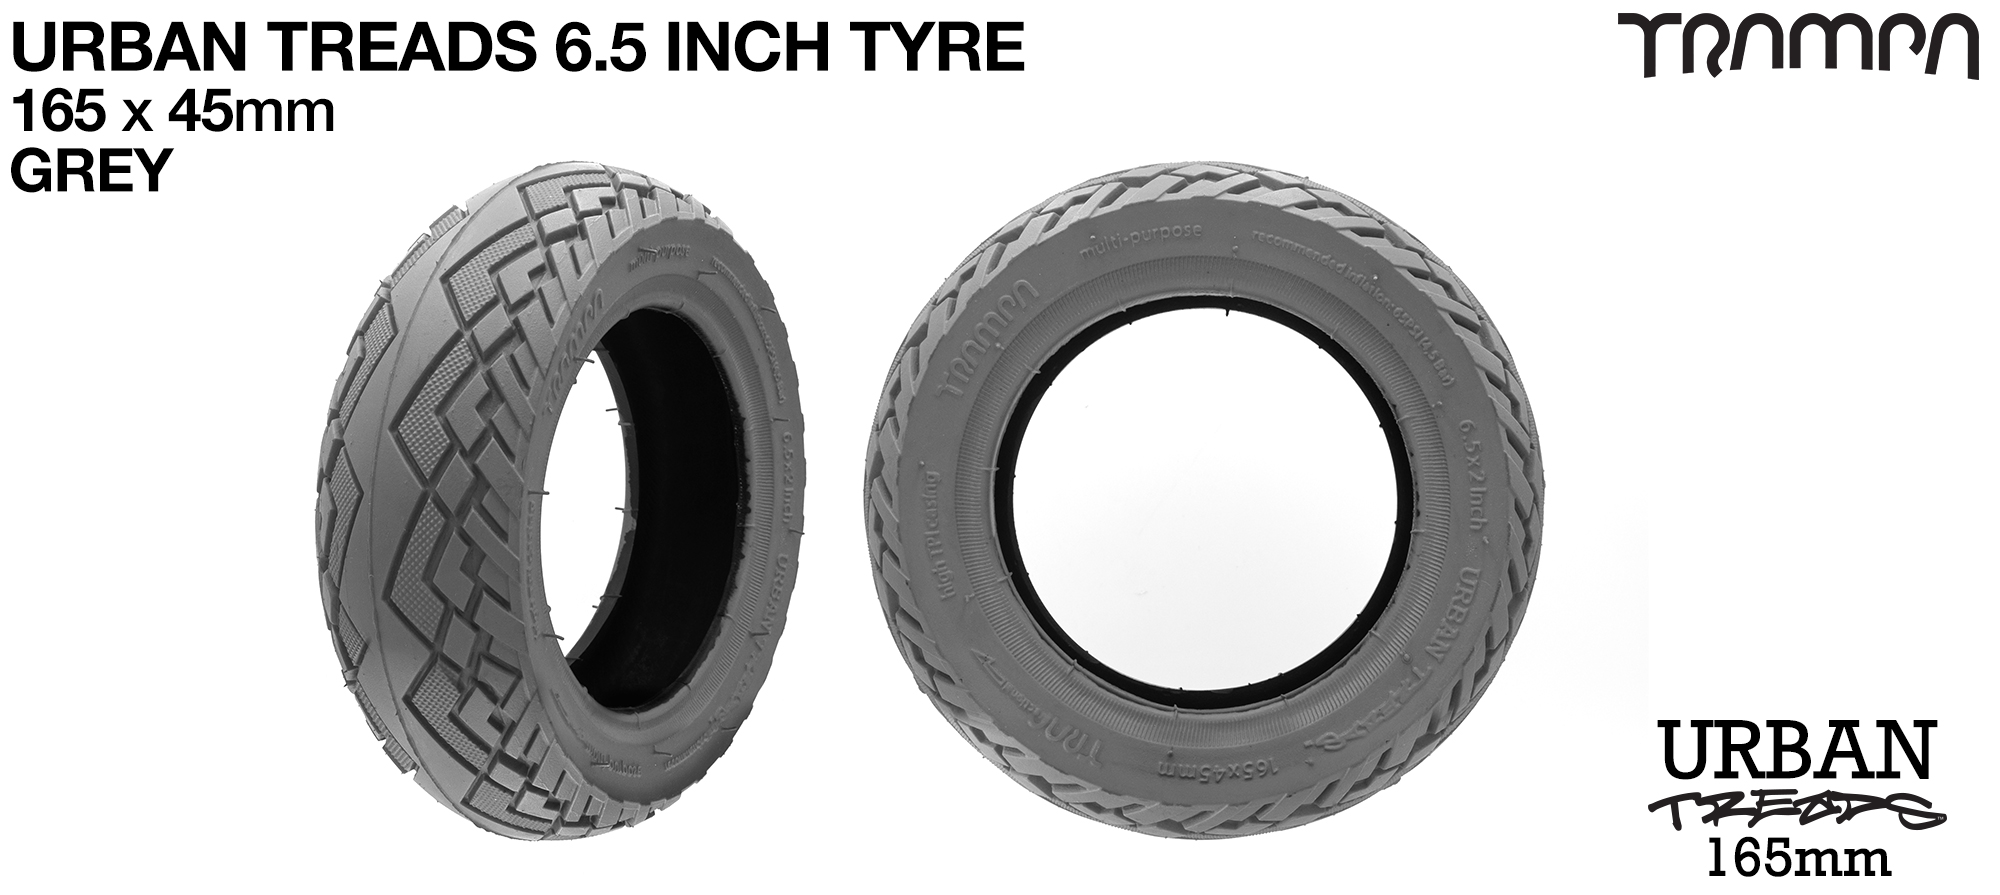 6.5 Inch Tyre TRAMPA URBAN TREADS is the perfect all round tyre for Urban & City riding - DARK GREY  